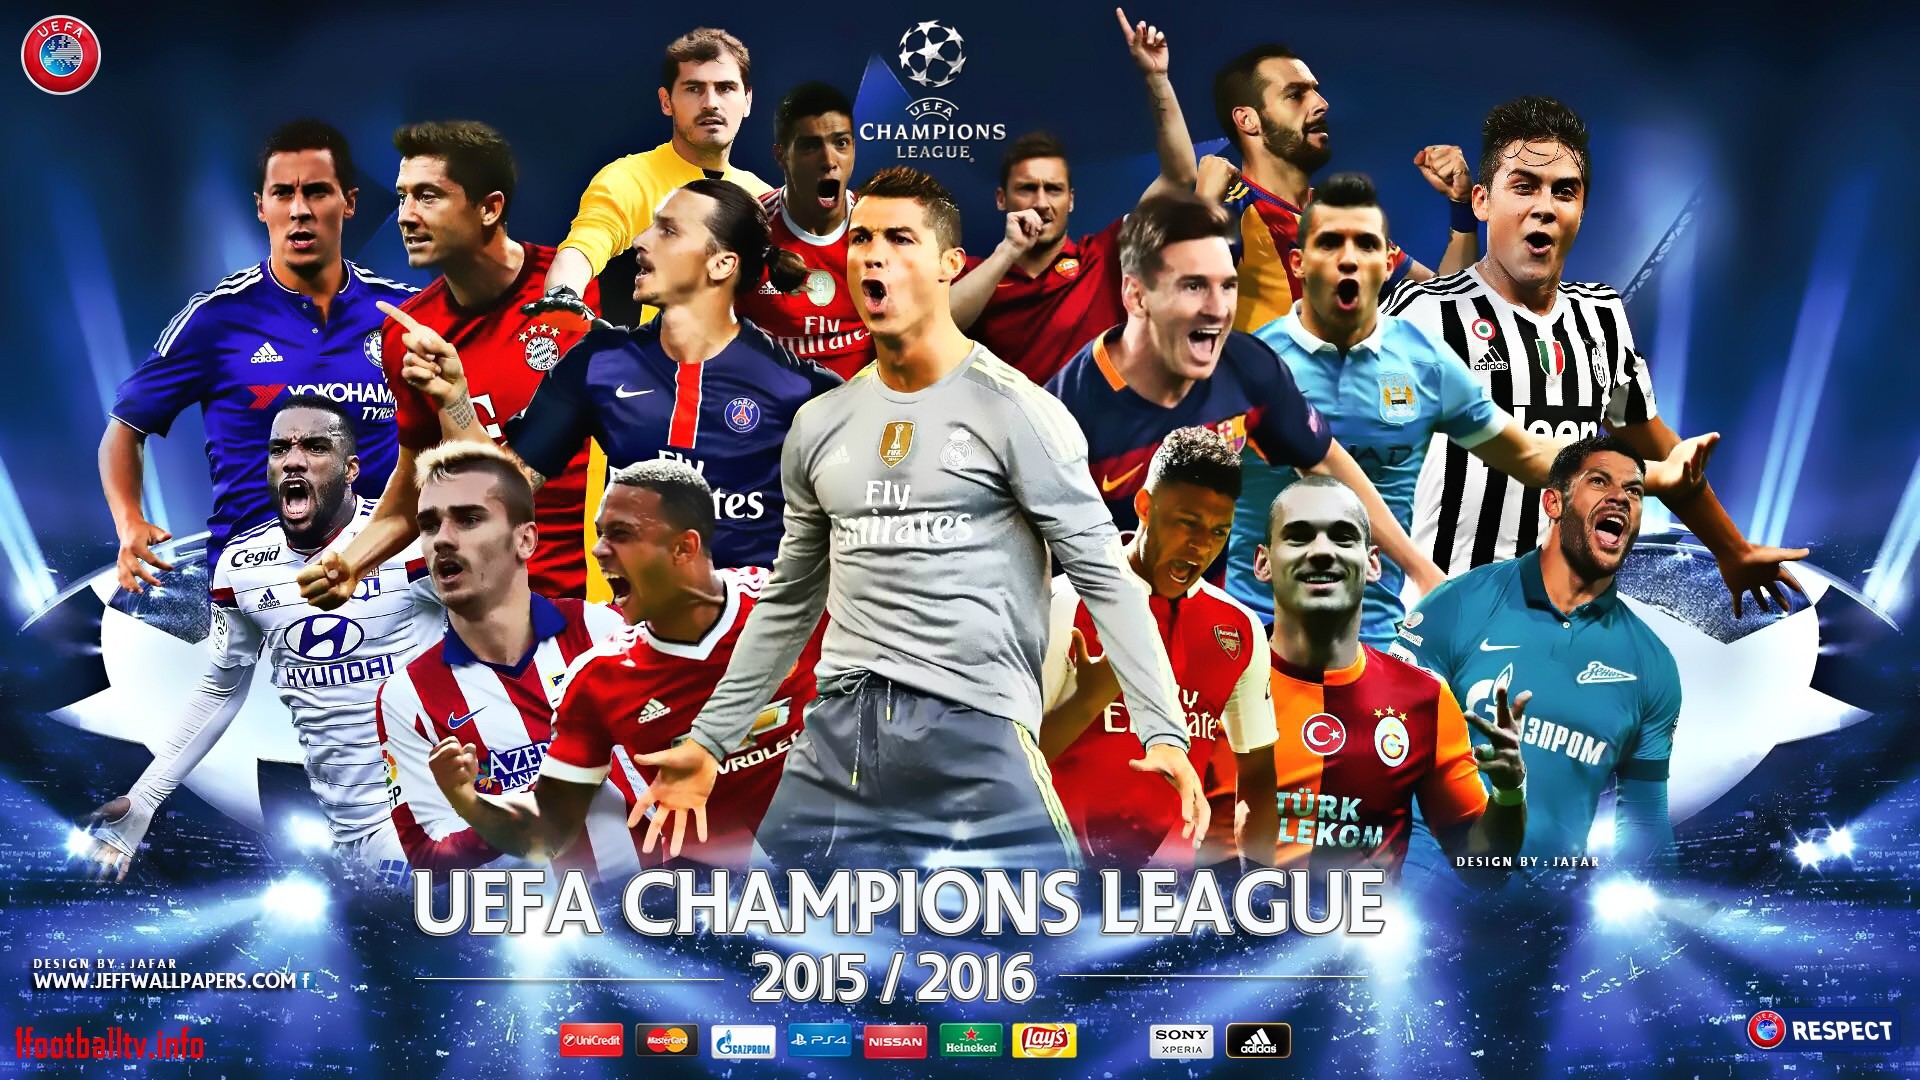 1920x1080 fc barcelona champions league wallpaper lovely uefa champions league 2015  2016 football star players hd wallpapers